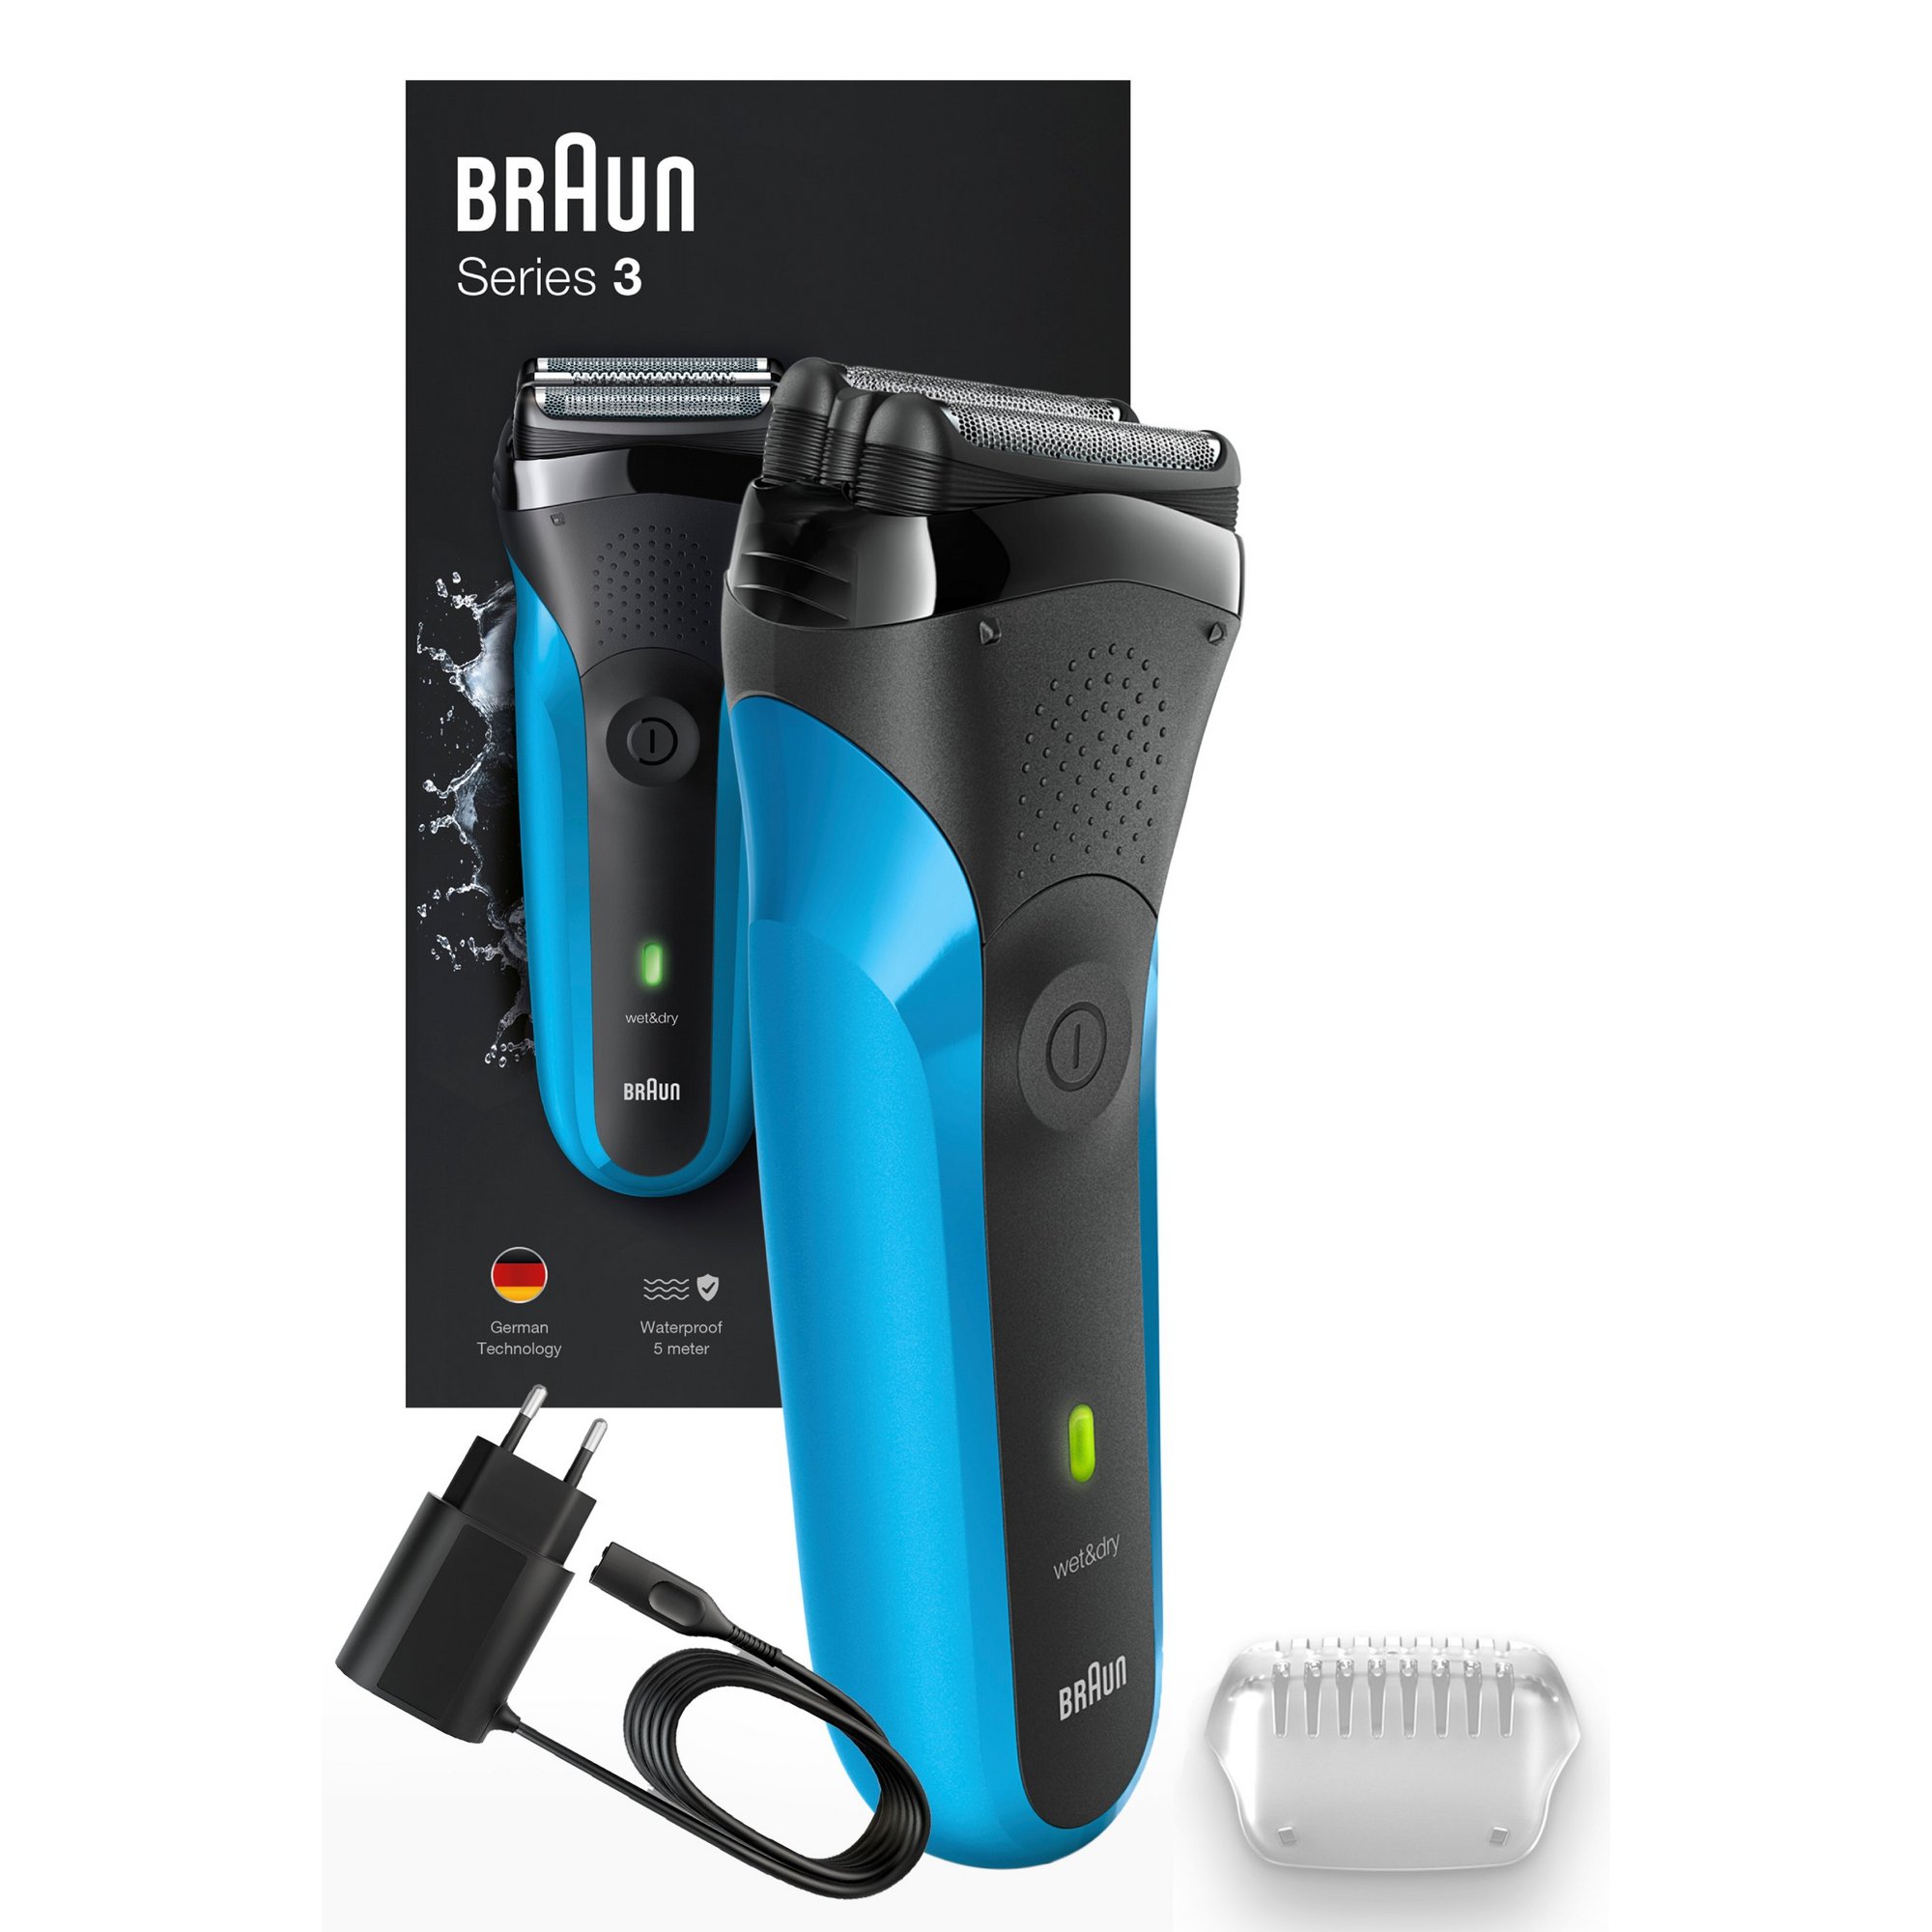 Braun 3 Series Cordless Wet and Dry Shaver